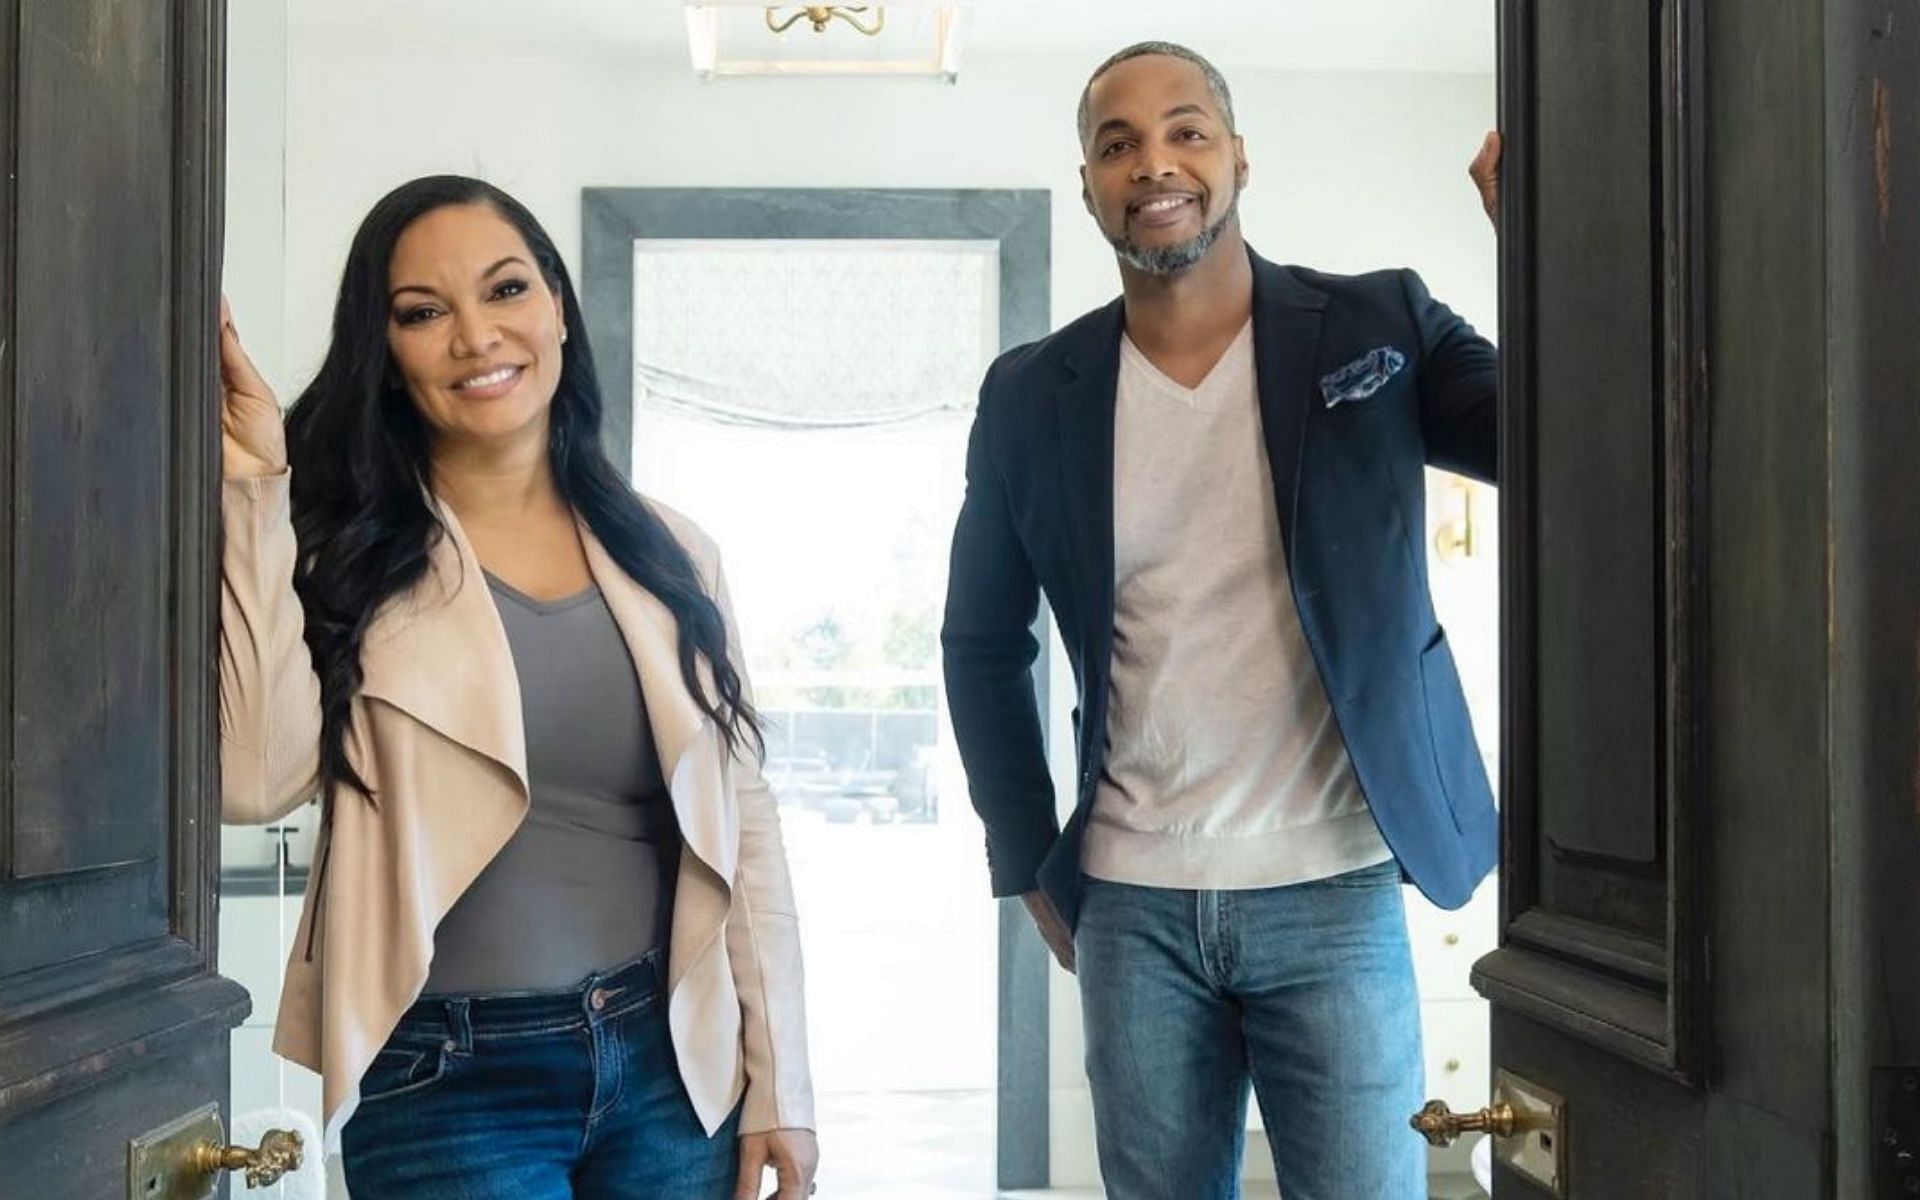 Egypt Sherrod and Mike Jackson from &lsquo;Married to Real Estate&rsquo; (Image via egyptsherrod/Instagram)